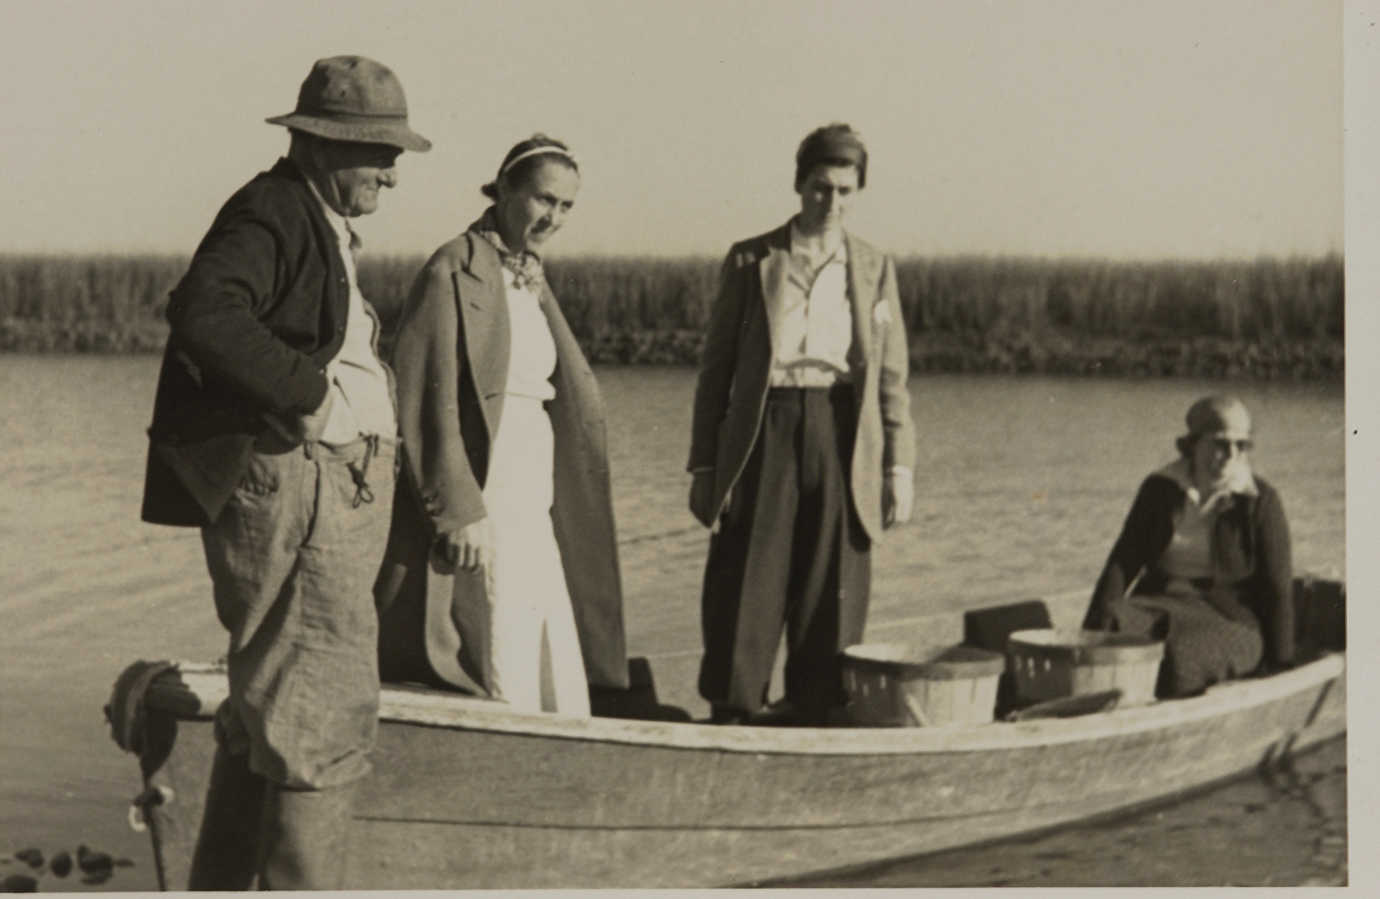 Archival photo from the site: women's rights and environmental activist Belle Baruch (middle right) entertains guests at Hobcaw Barony, which she gradually acquired from her father and eventually transformed into a nature preserve and research center. Photo courtesy of SCETV.